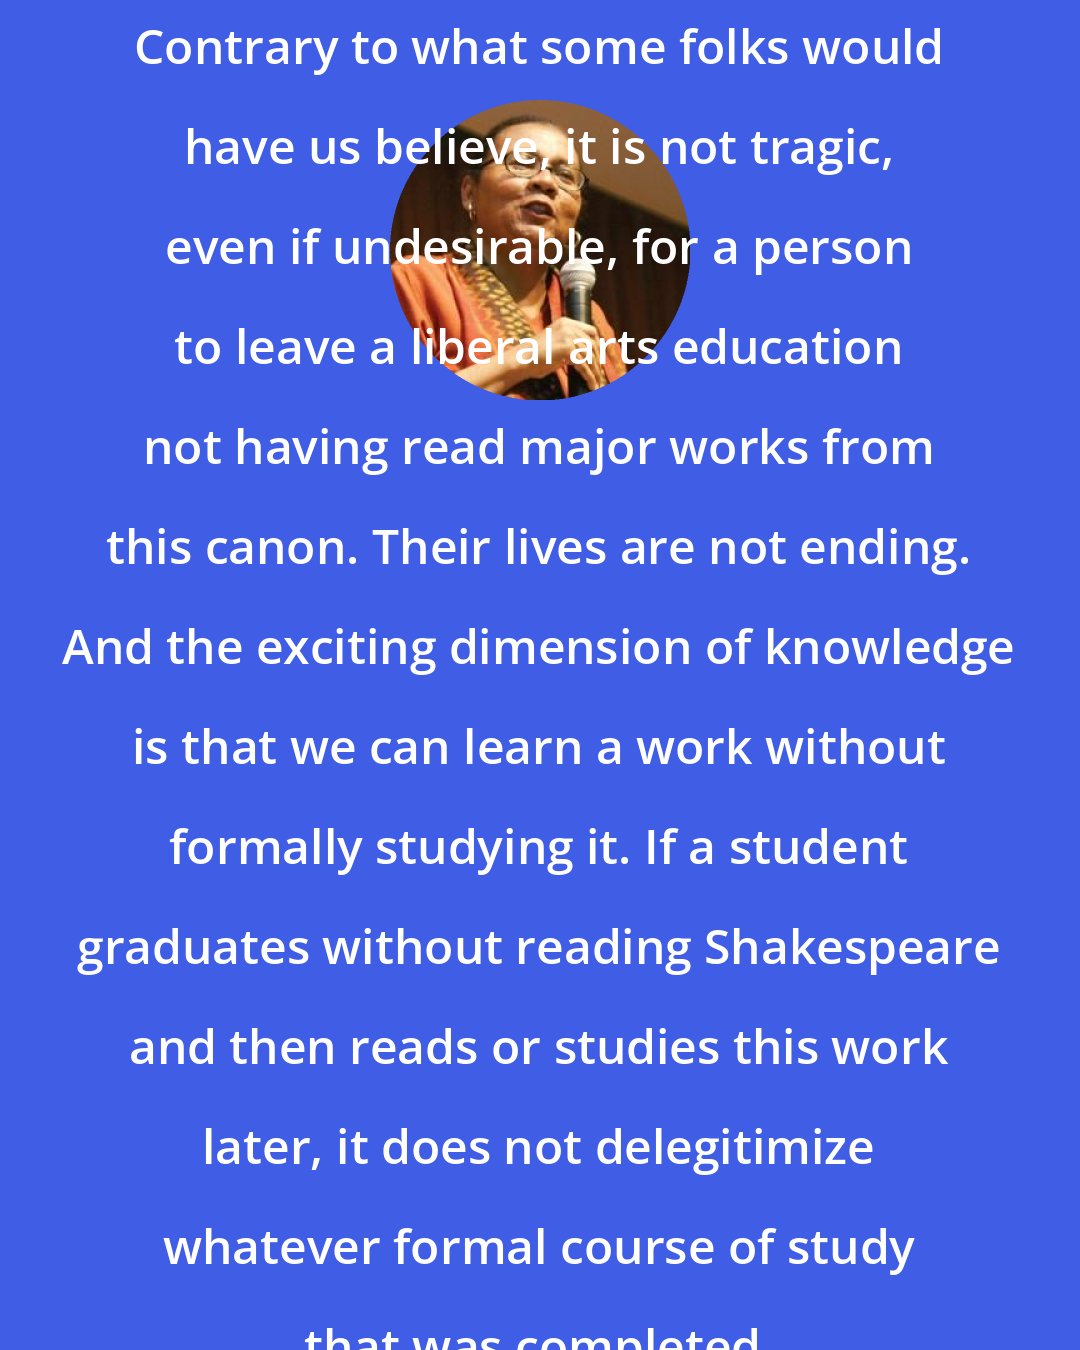 Bell Hooks: Contrary to what some folks would have us believe, it is not tragic, even if undesirable, for a person to leave a liberal arts education not having read major works from this canon. Their lives are not ending. And the exciting dimension of knowledge is that we can learn a work without formally studying it. If a student graduates without reading Shakespeare and then reads or studies this work later, it does not delegitimize whatever formal course of study that was completed.